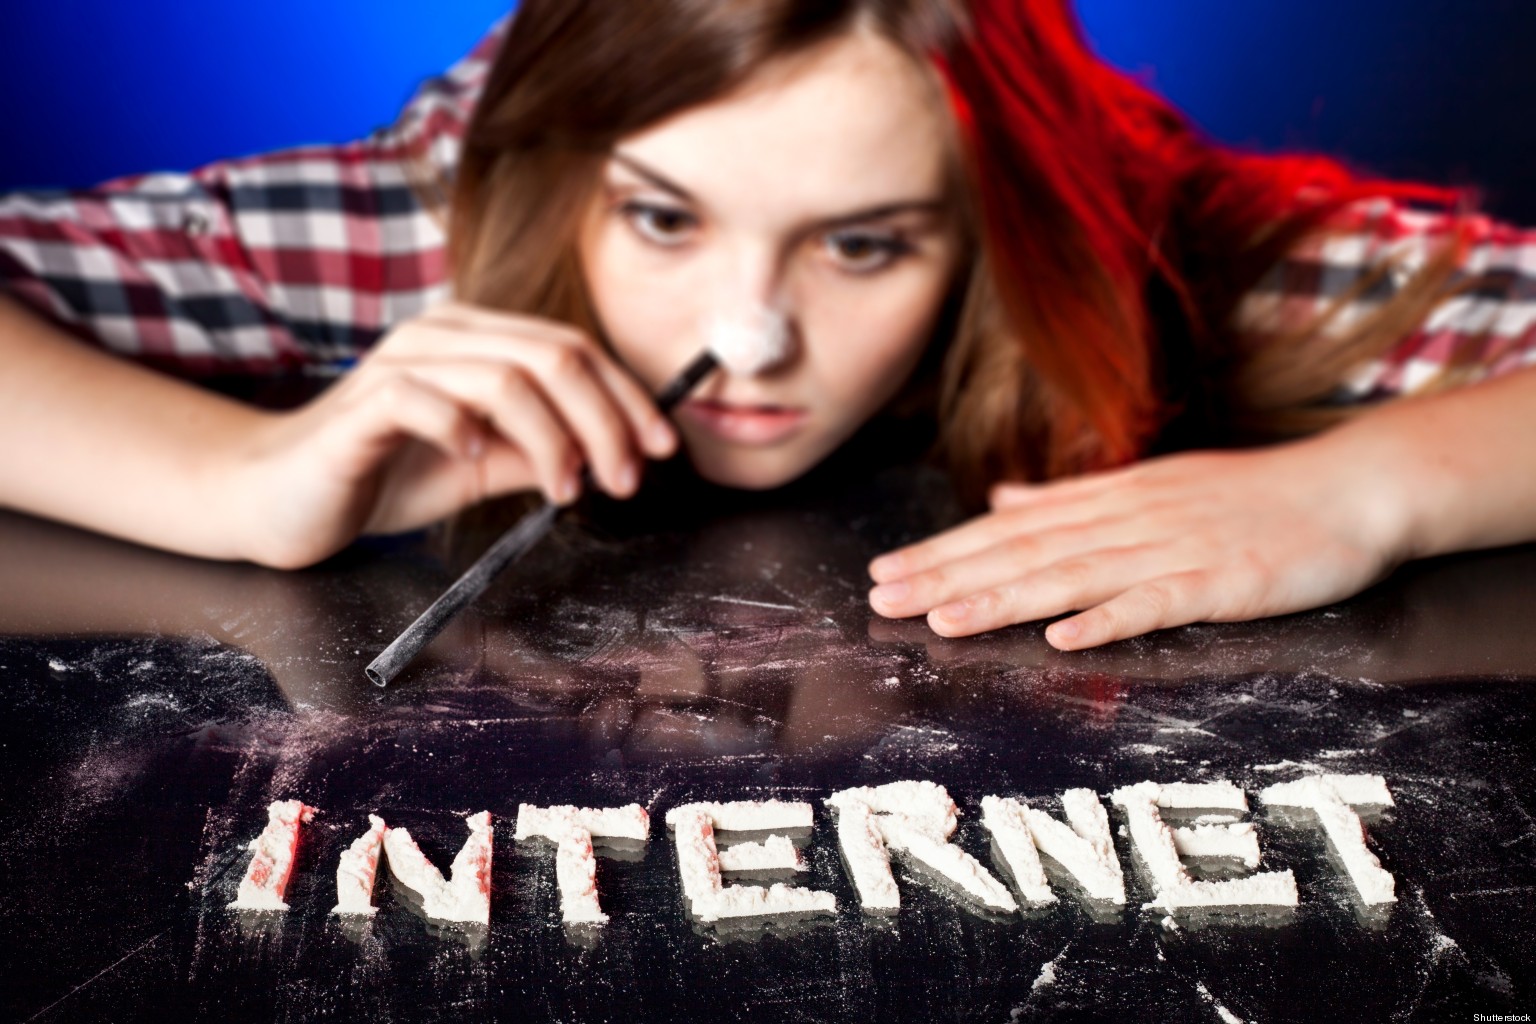 growing-number-of-young-people-suffering-from-internet-addiction